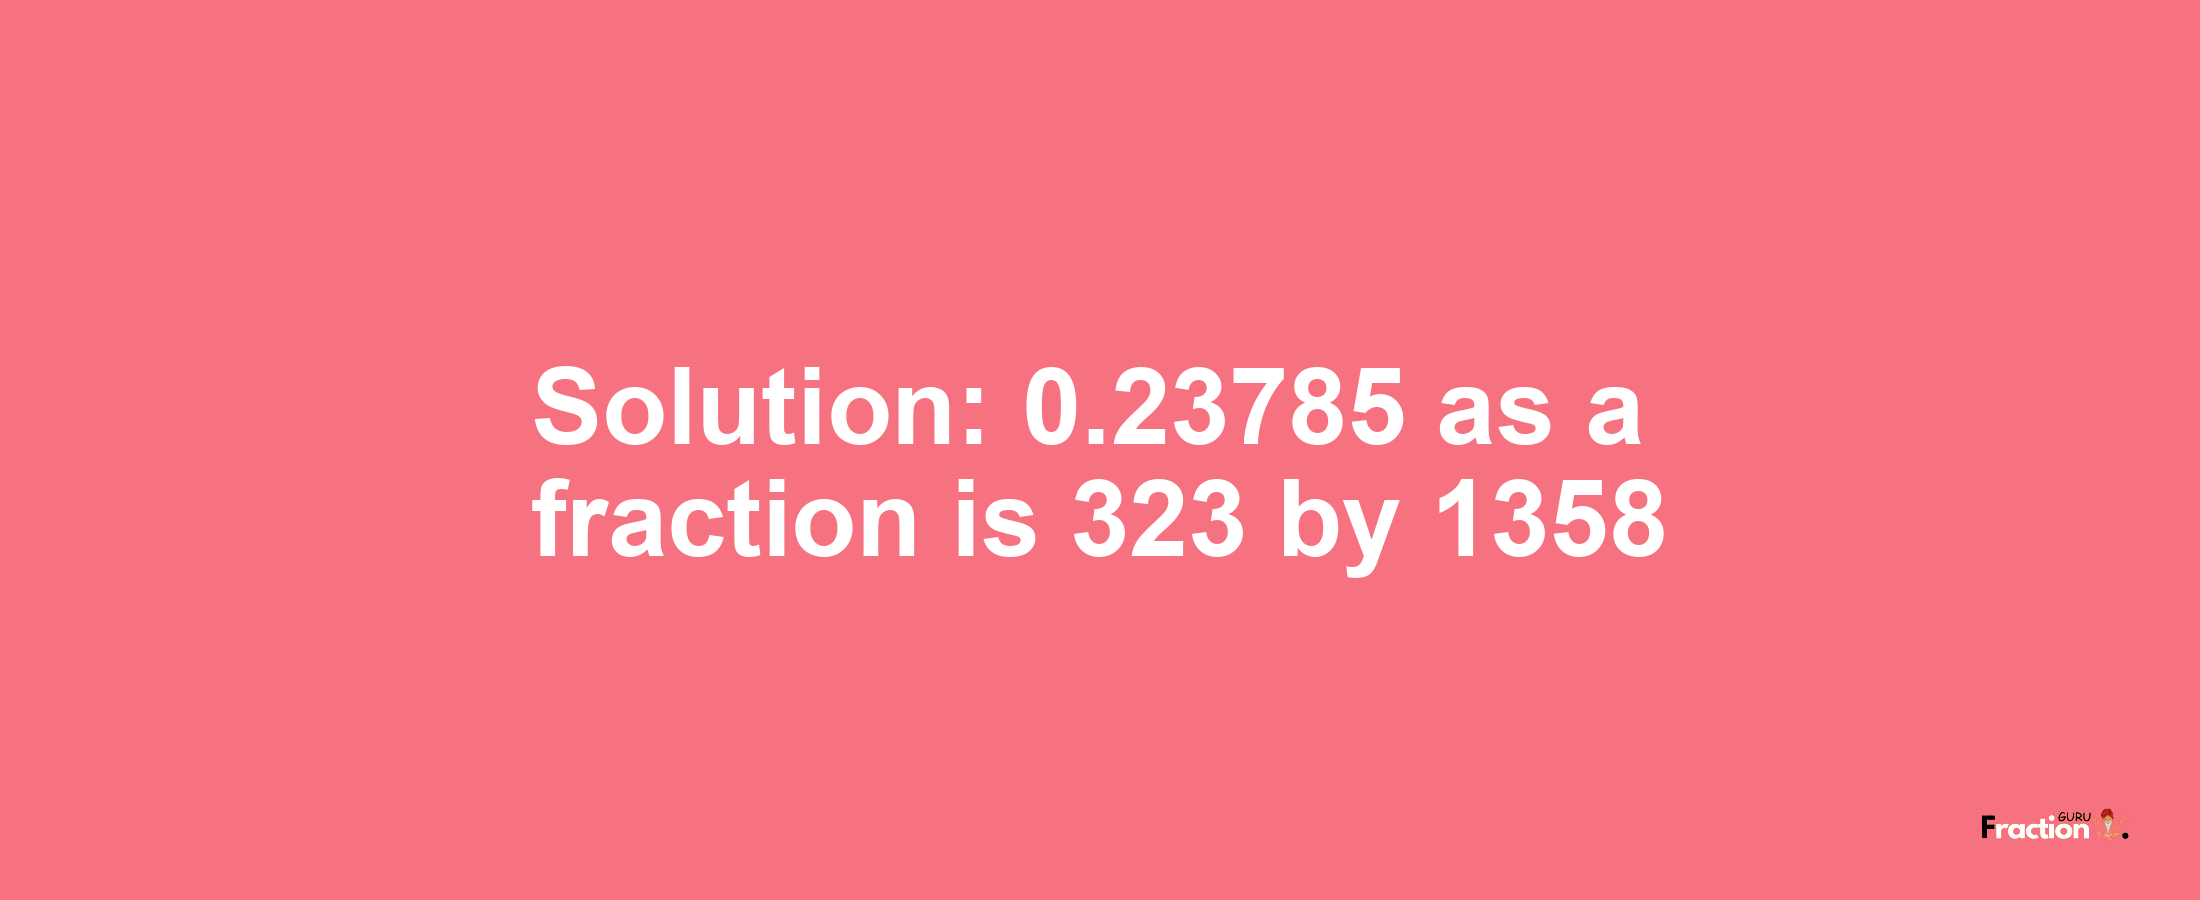 Solution:0.23785 as a fraction is 323/1358